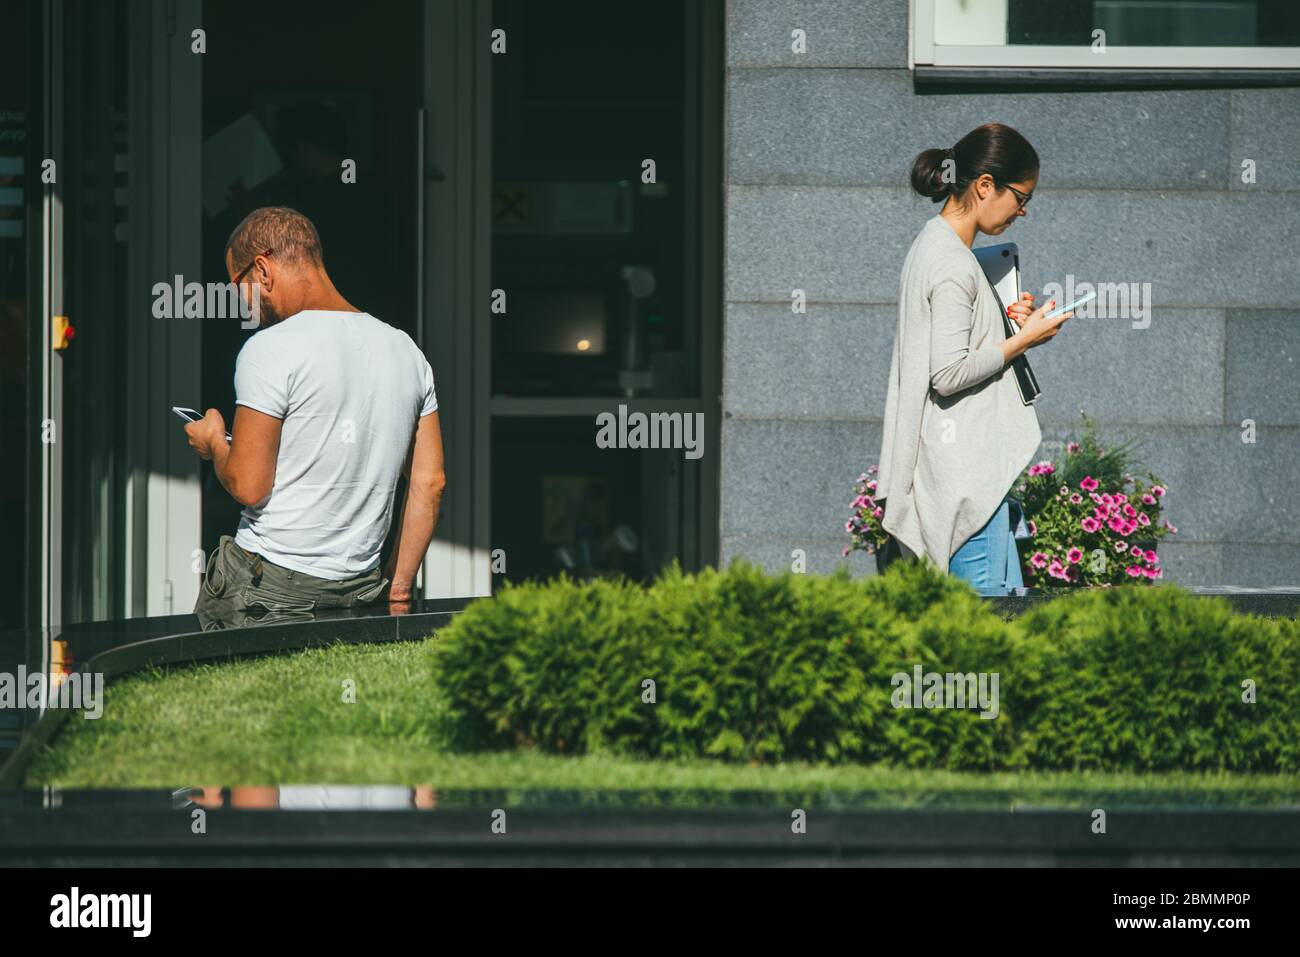 Moscow, Russia - AUGUST 31, 2017: A young man and woman stand and use their phones keeping a social distance from each other on the streets of a Stock Photo